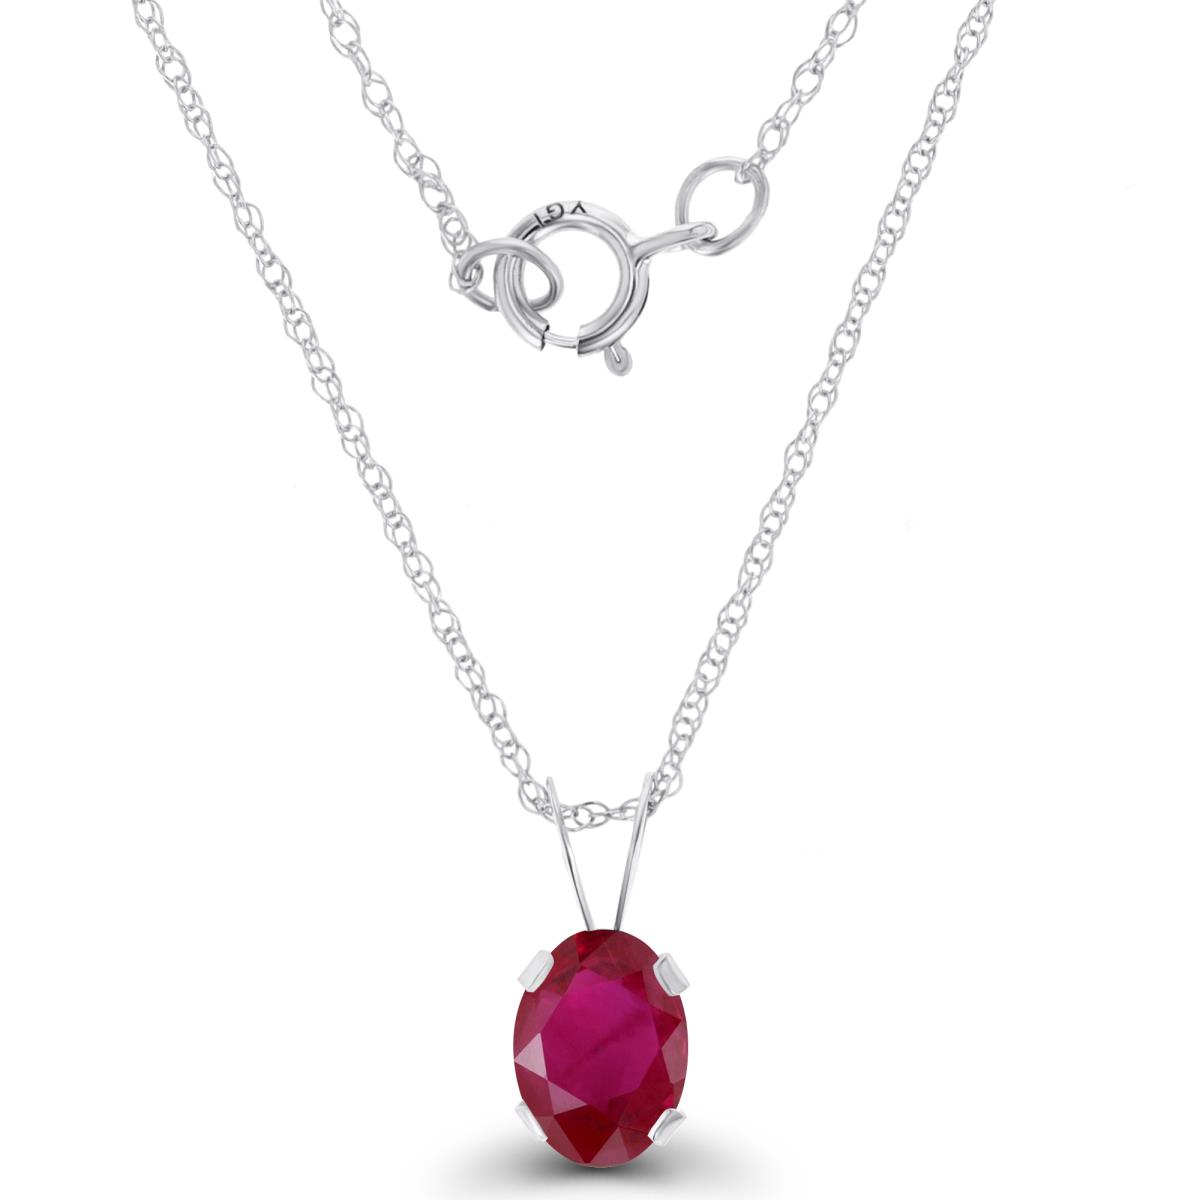 14K White Gold 7x5mm Oval Glass Filled Ruby 18" Rope Chain Necklace